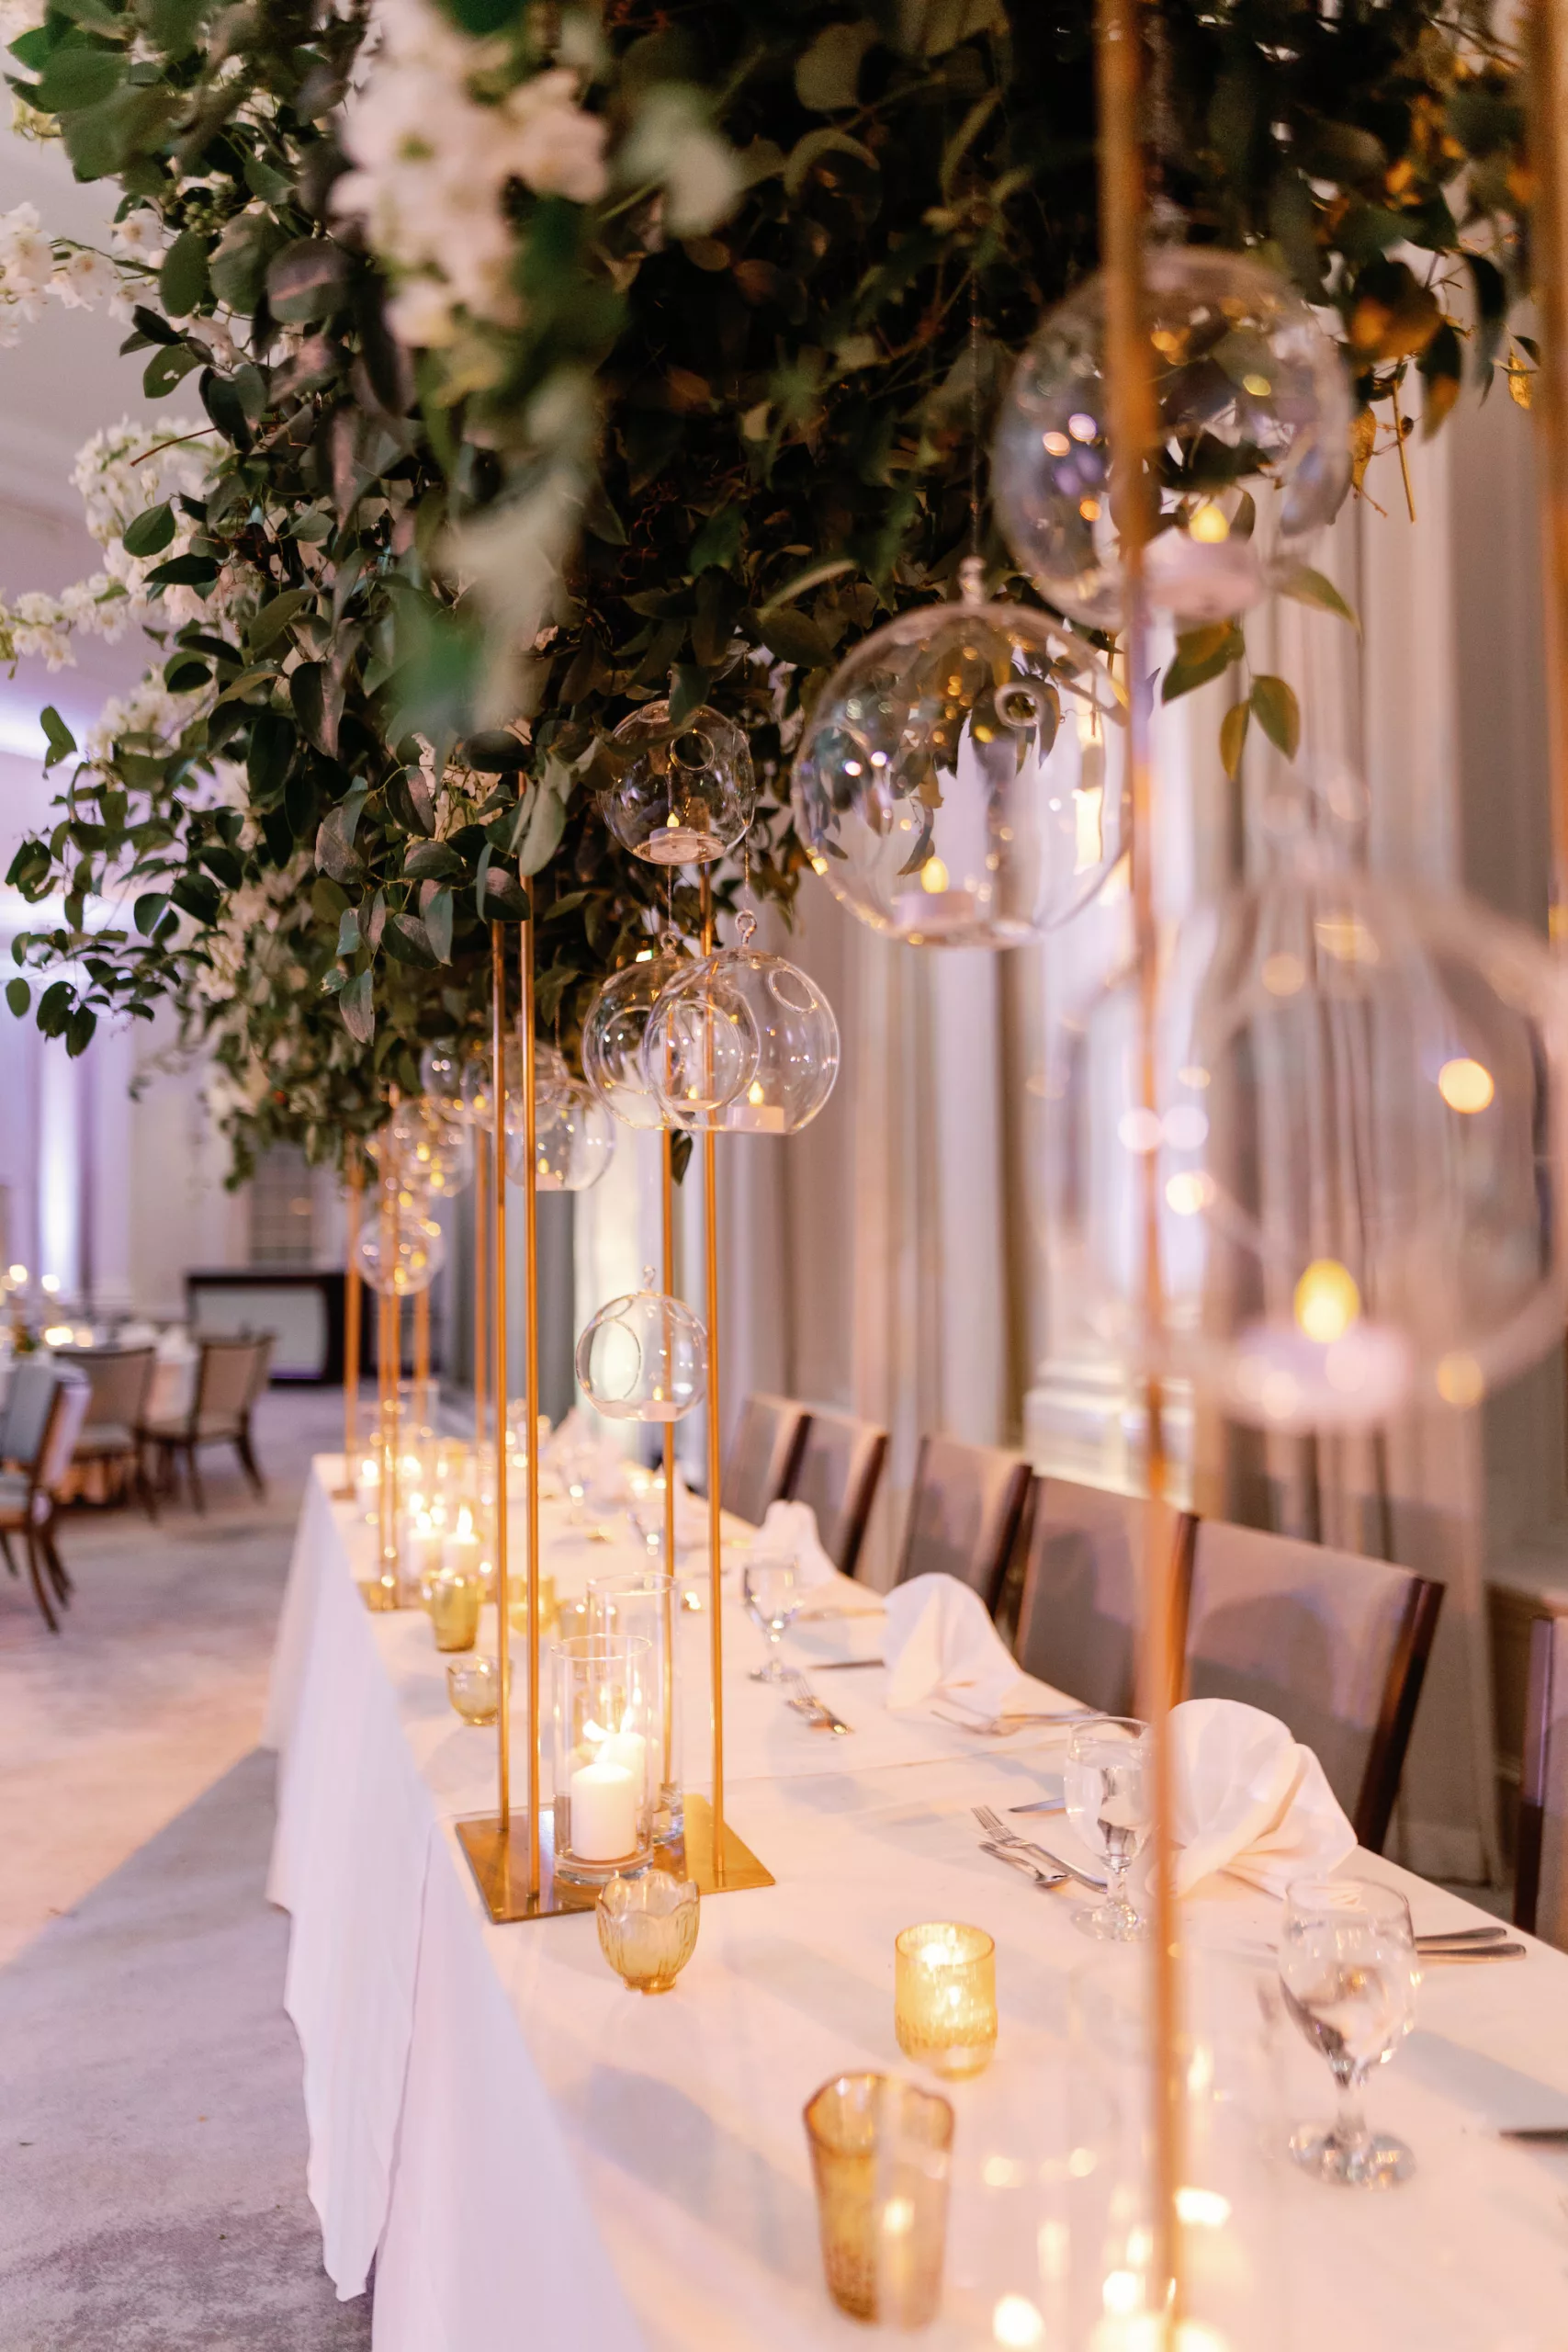 Luxurious White and Gold Grand Ballroom Wedding Reception Head Table Decor Ideas | Hanging Glass Vase Globe Tealight Candle Holder, Long White Feasting Table, Tall Gold Floral Stand with Cascading Greenery and White Flowers | Tampa Bay Event Planner Coastal Coordinating